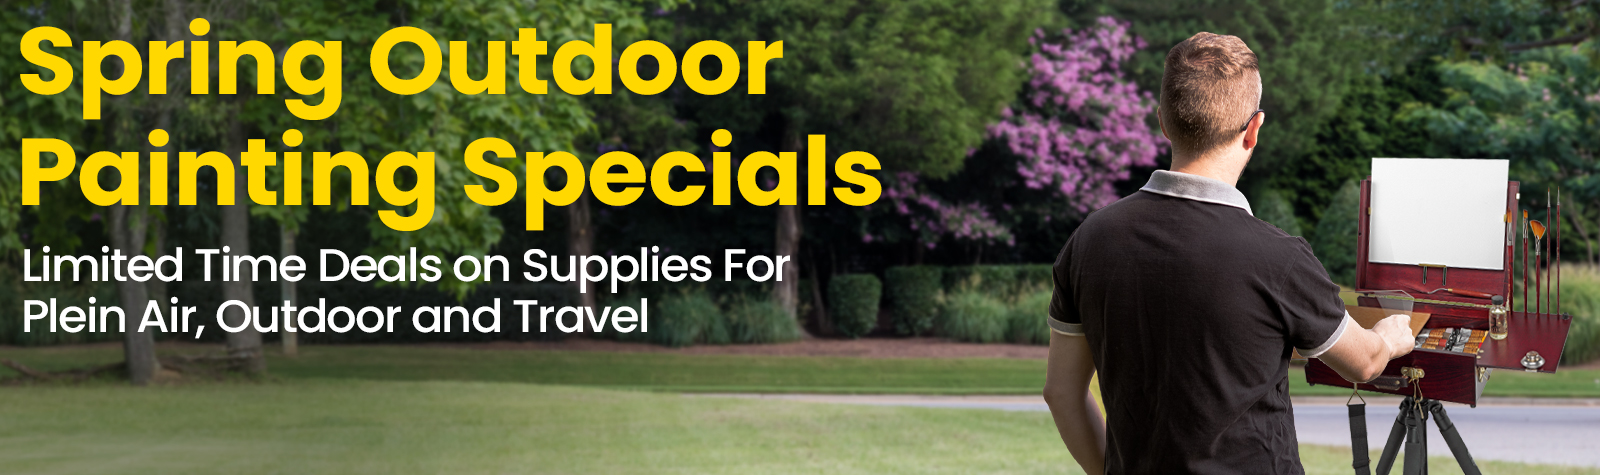 Spring Outdoor Painting Specials